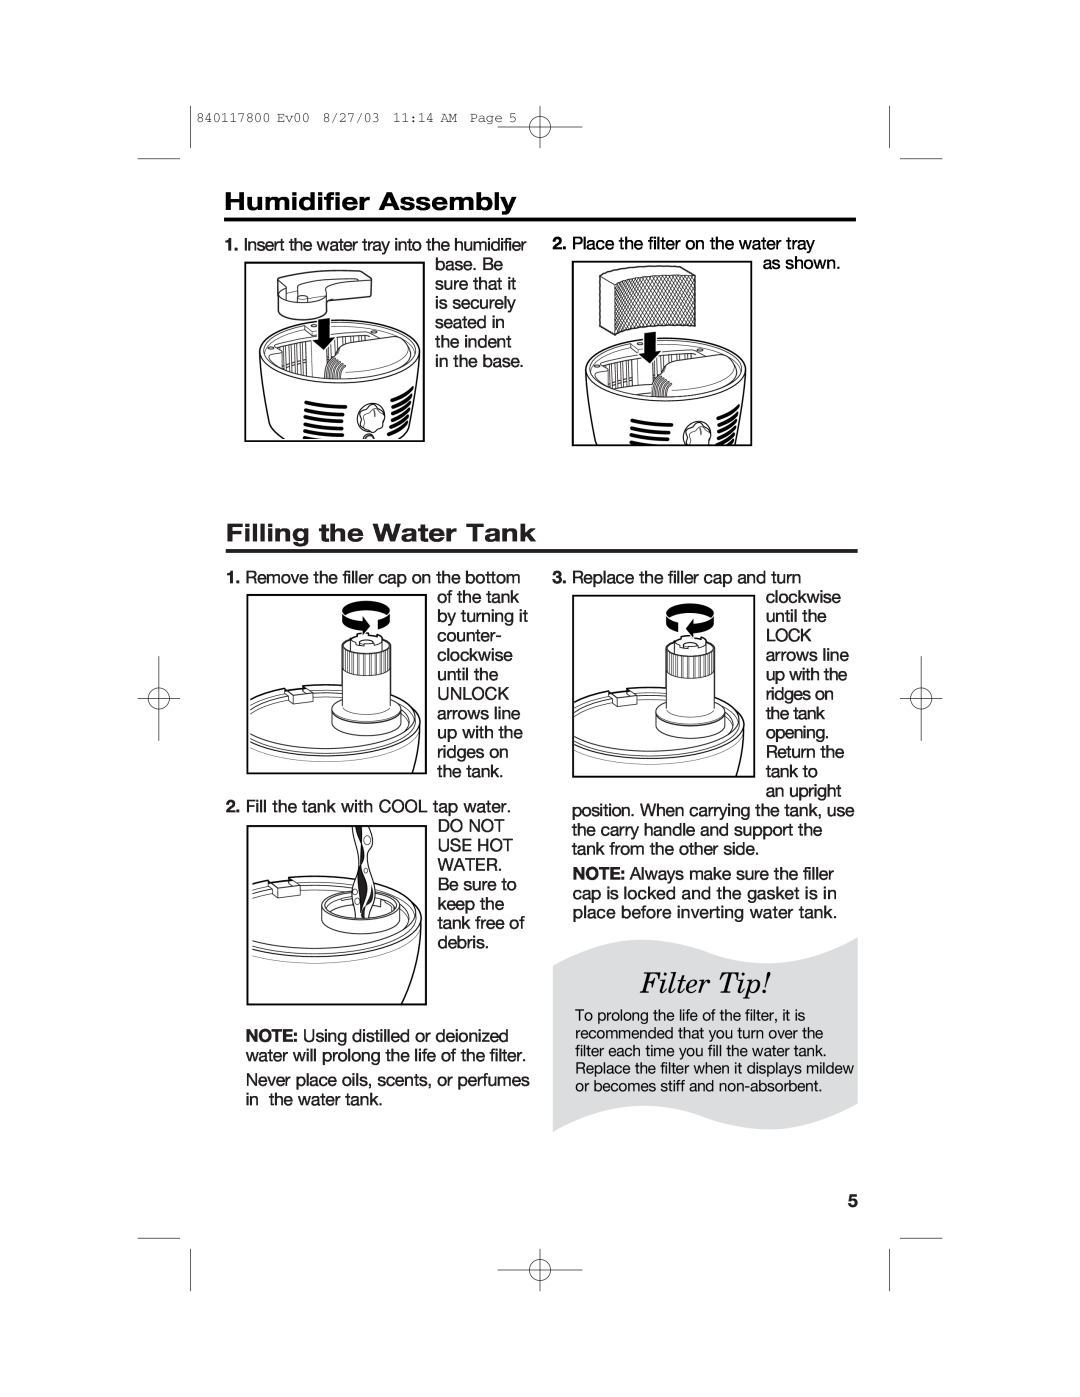 Hamilton Beach 840117800 manual Filter Tip, Humidifier Assembly, Filling the Water Tank 